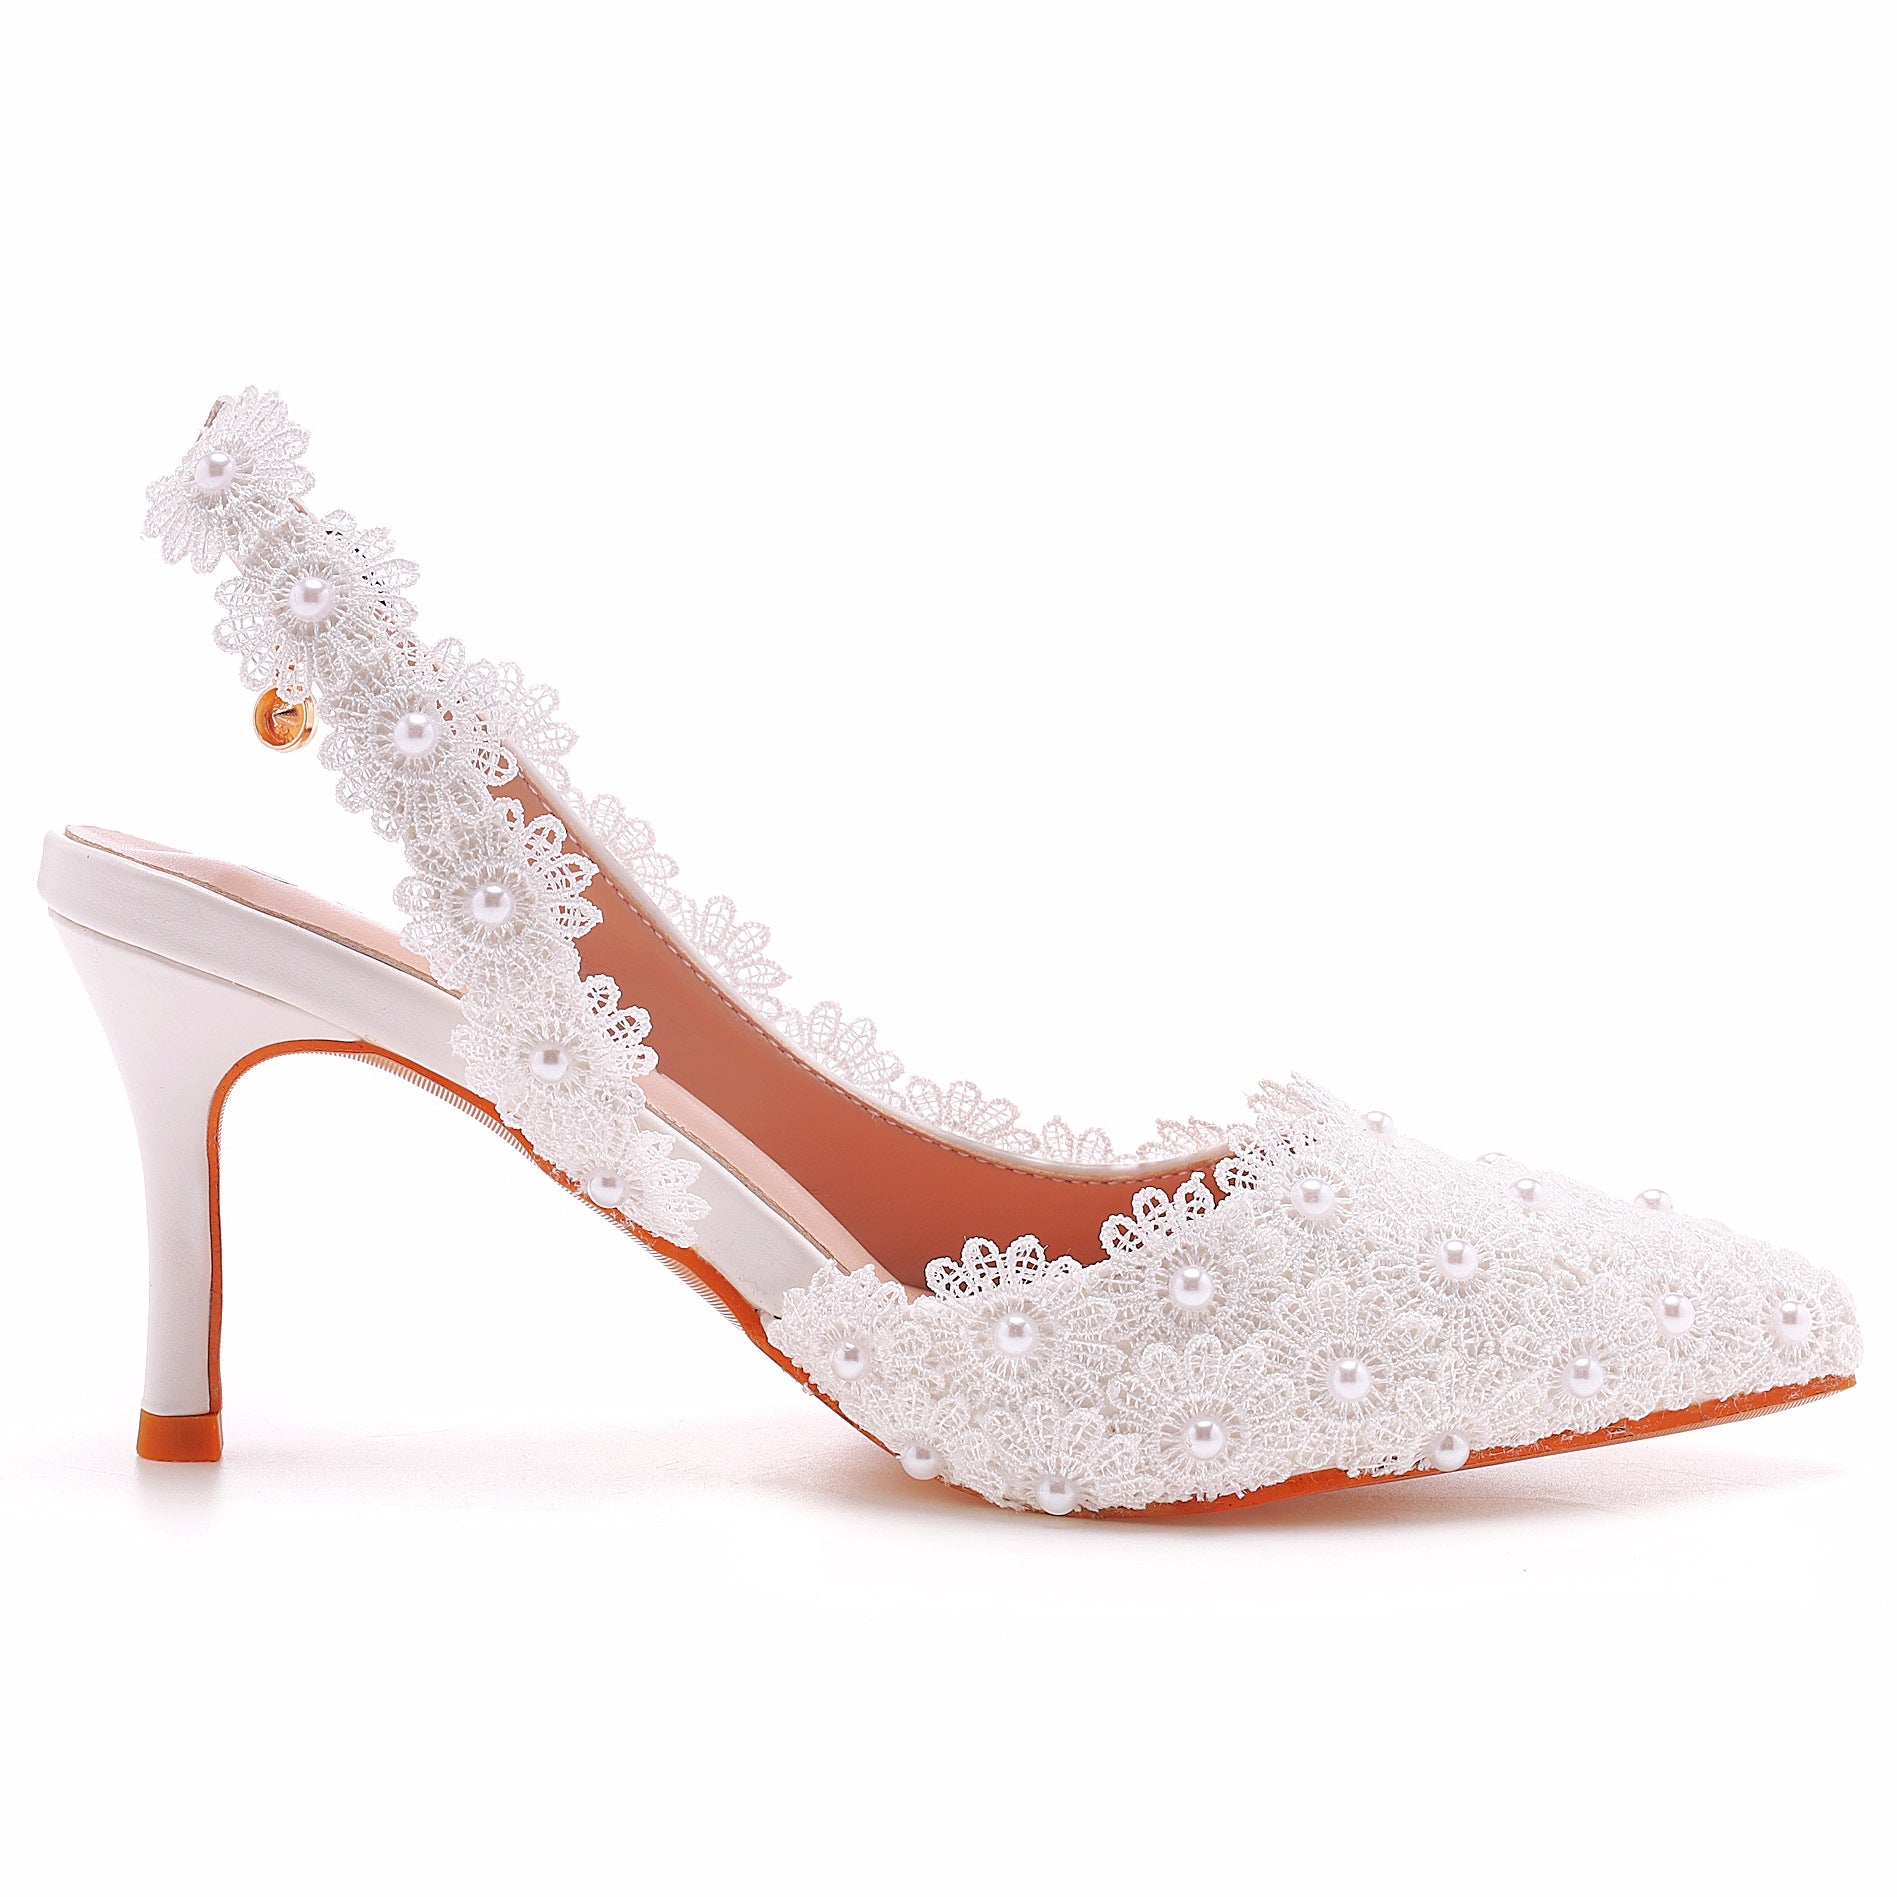 Pointed Toe White Lace Flower Slingback High Heels